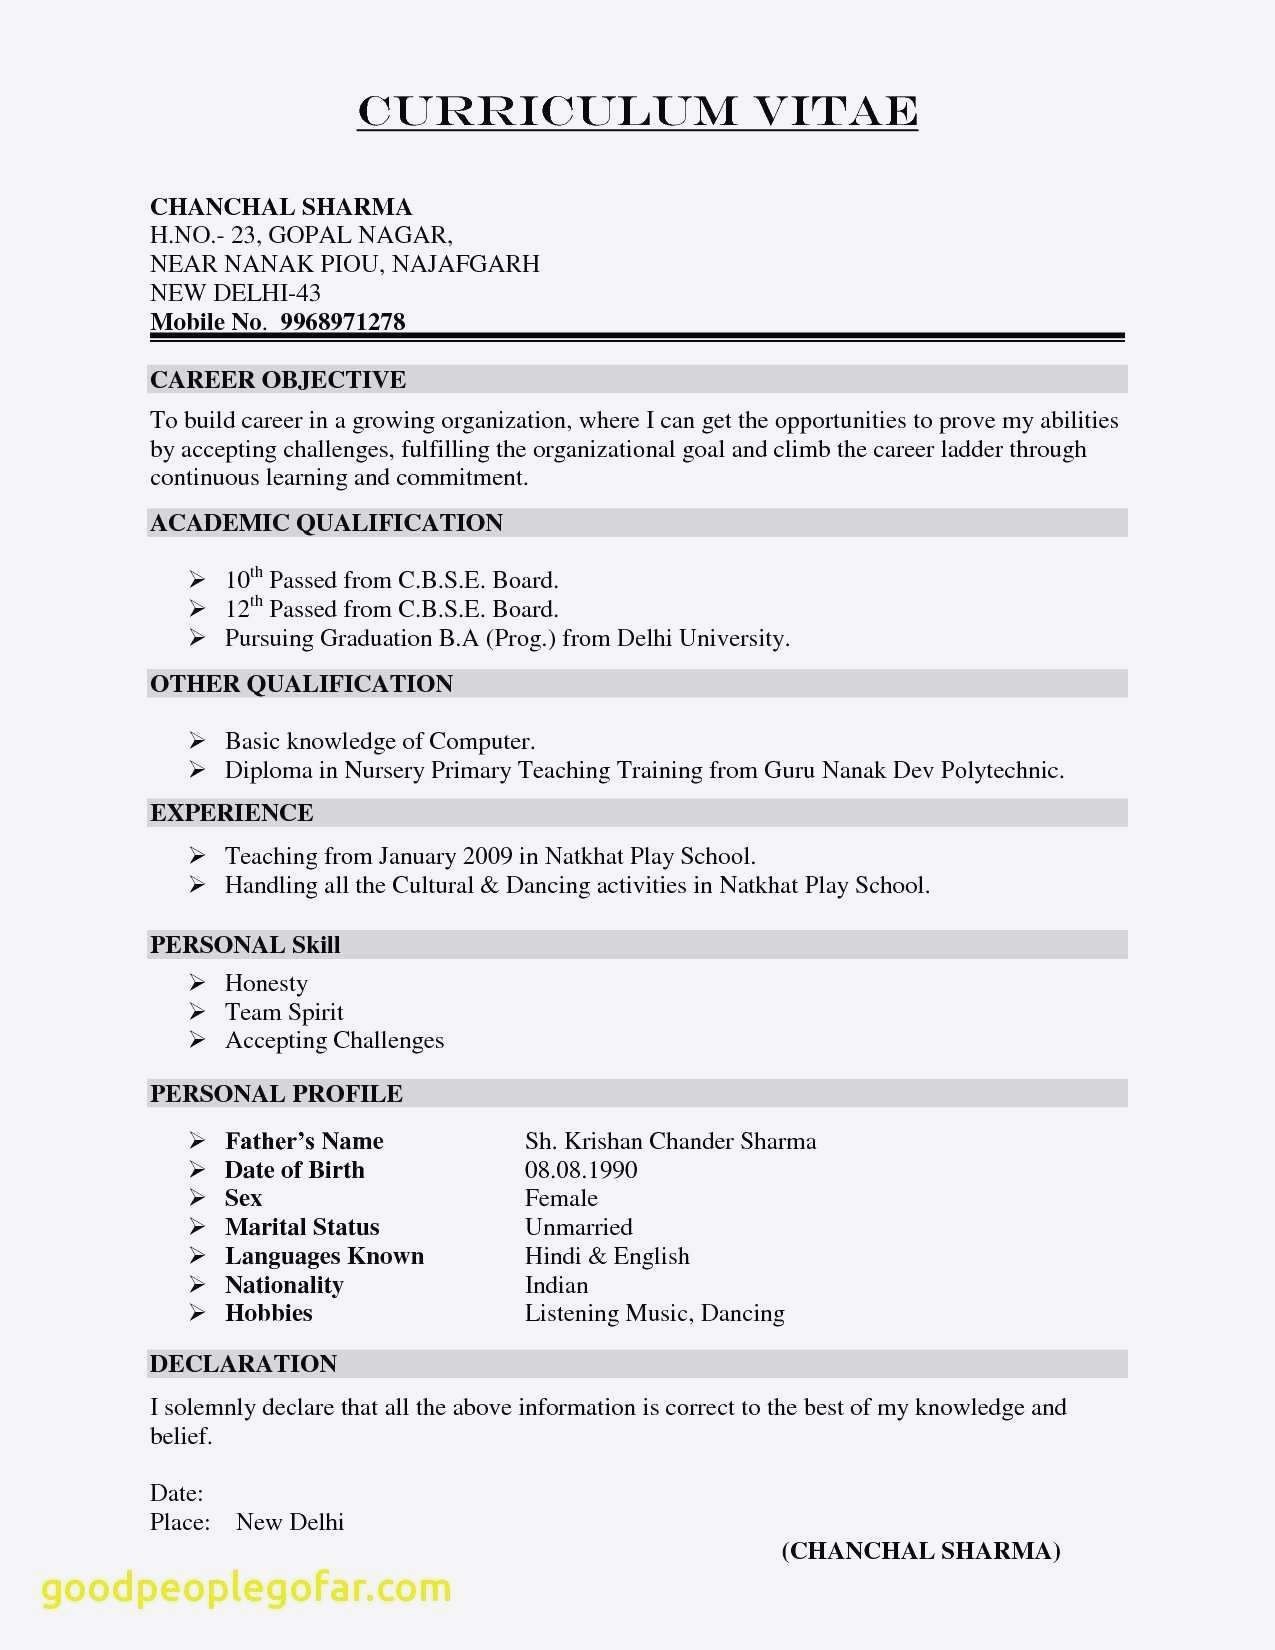 Free Resume Templates In English Awesome Curriculum Vitae Sample Filetype Doc New Resume Templete